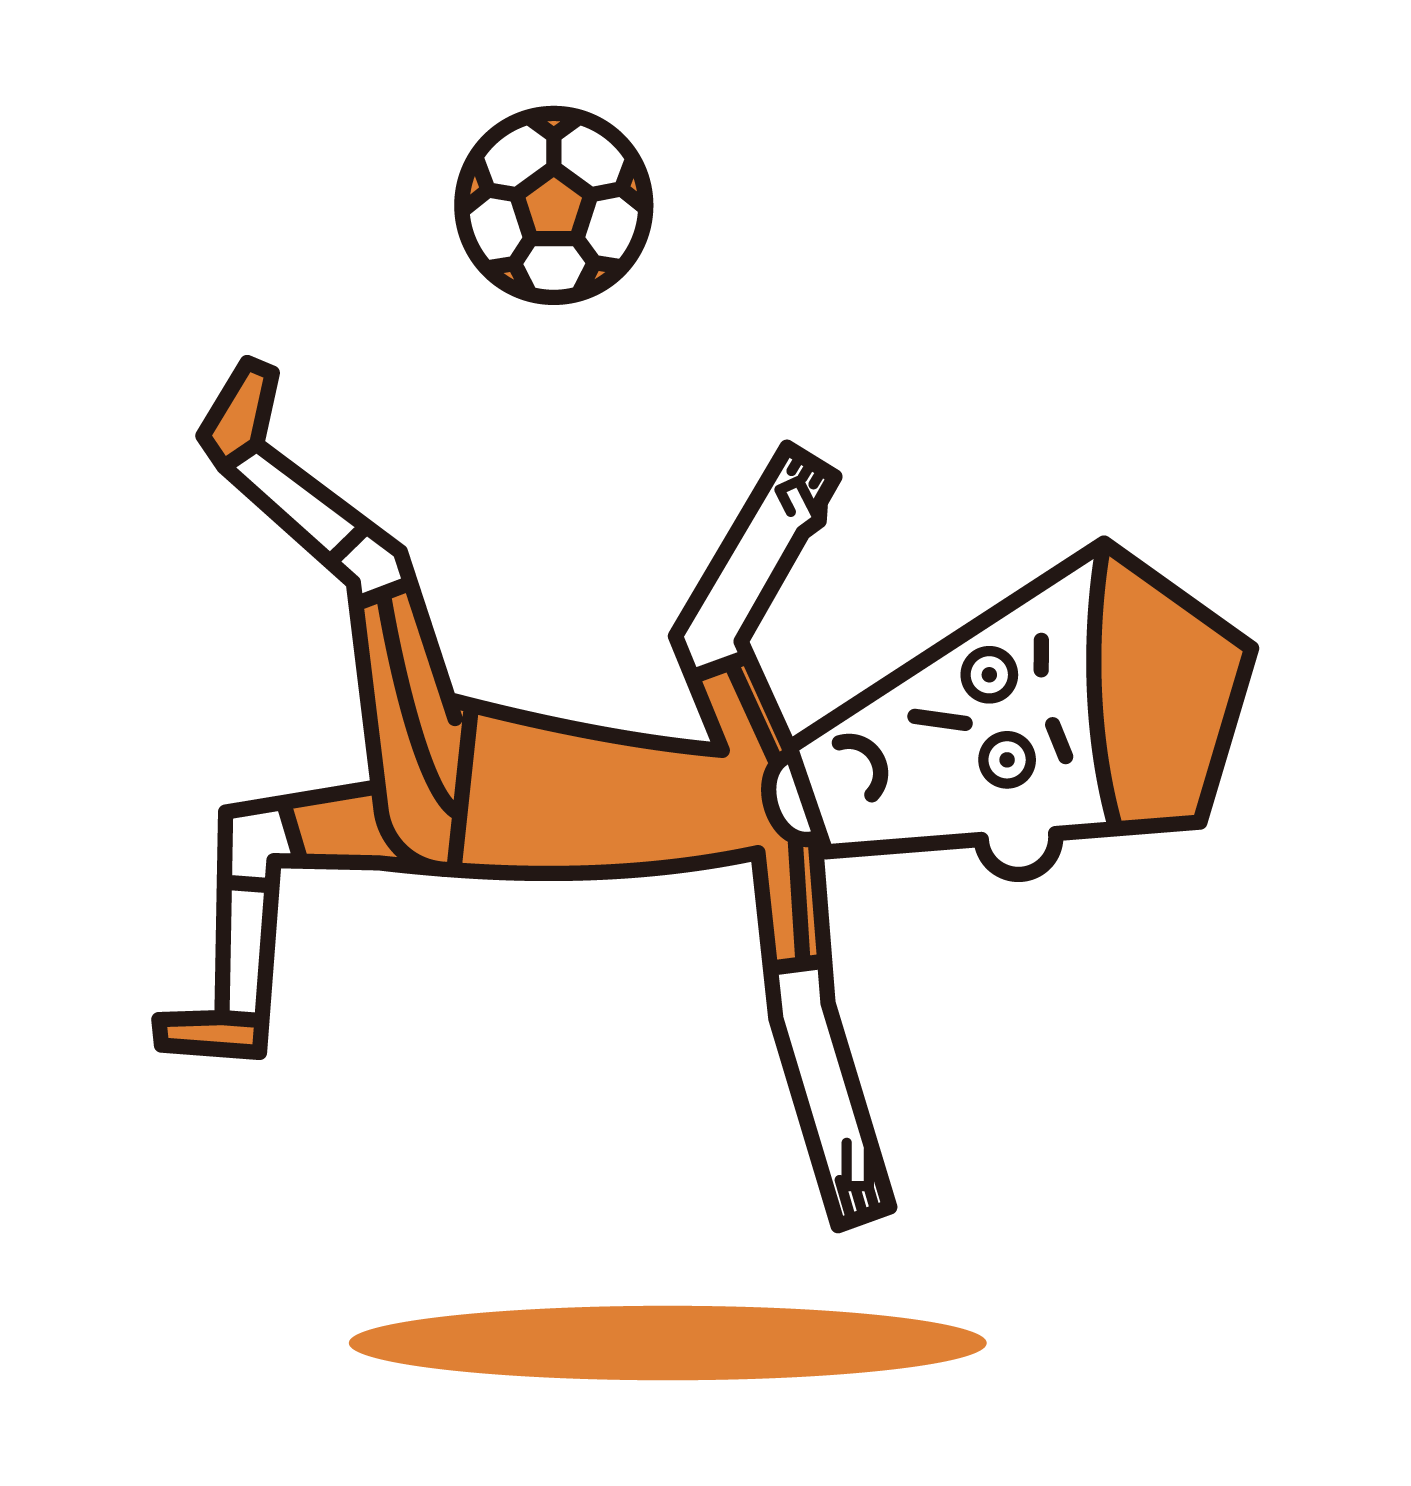 Illustration of a male soccer player doing an overhead kick